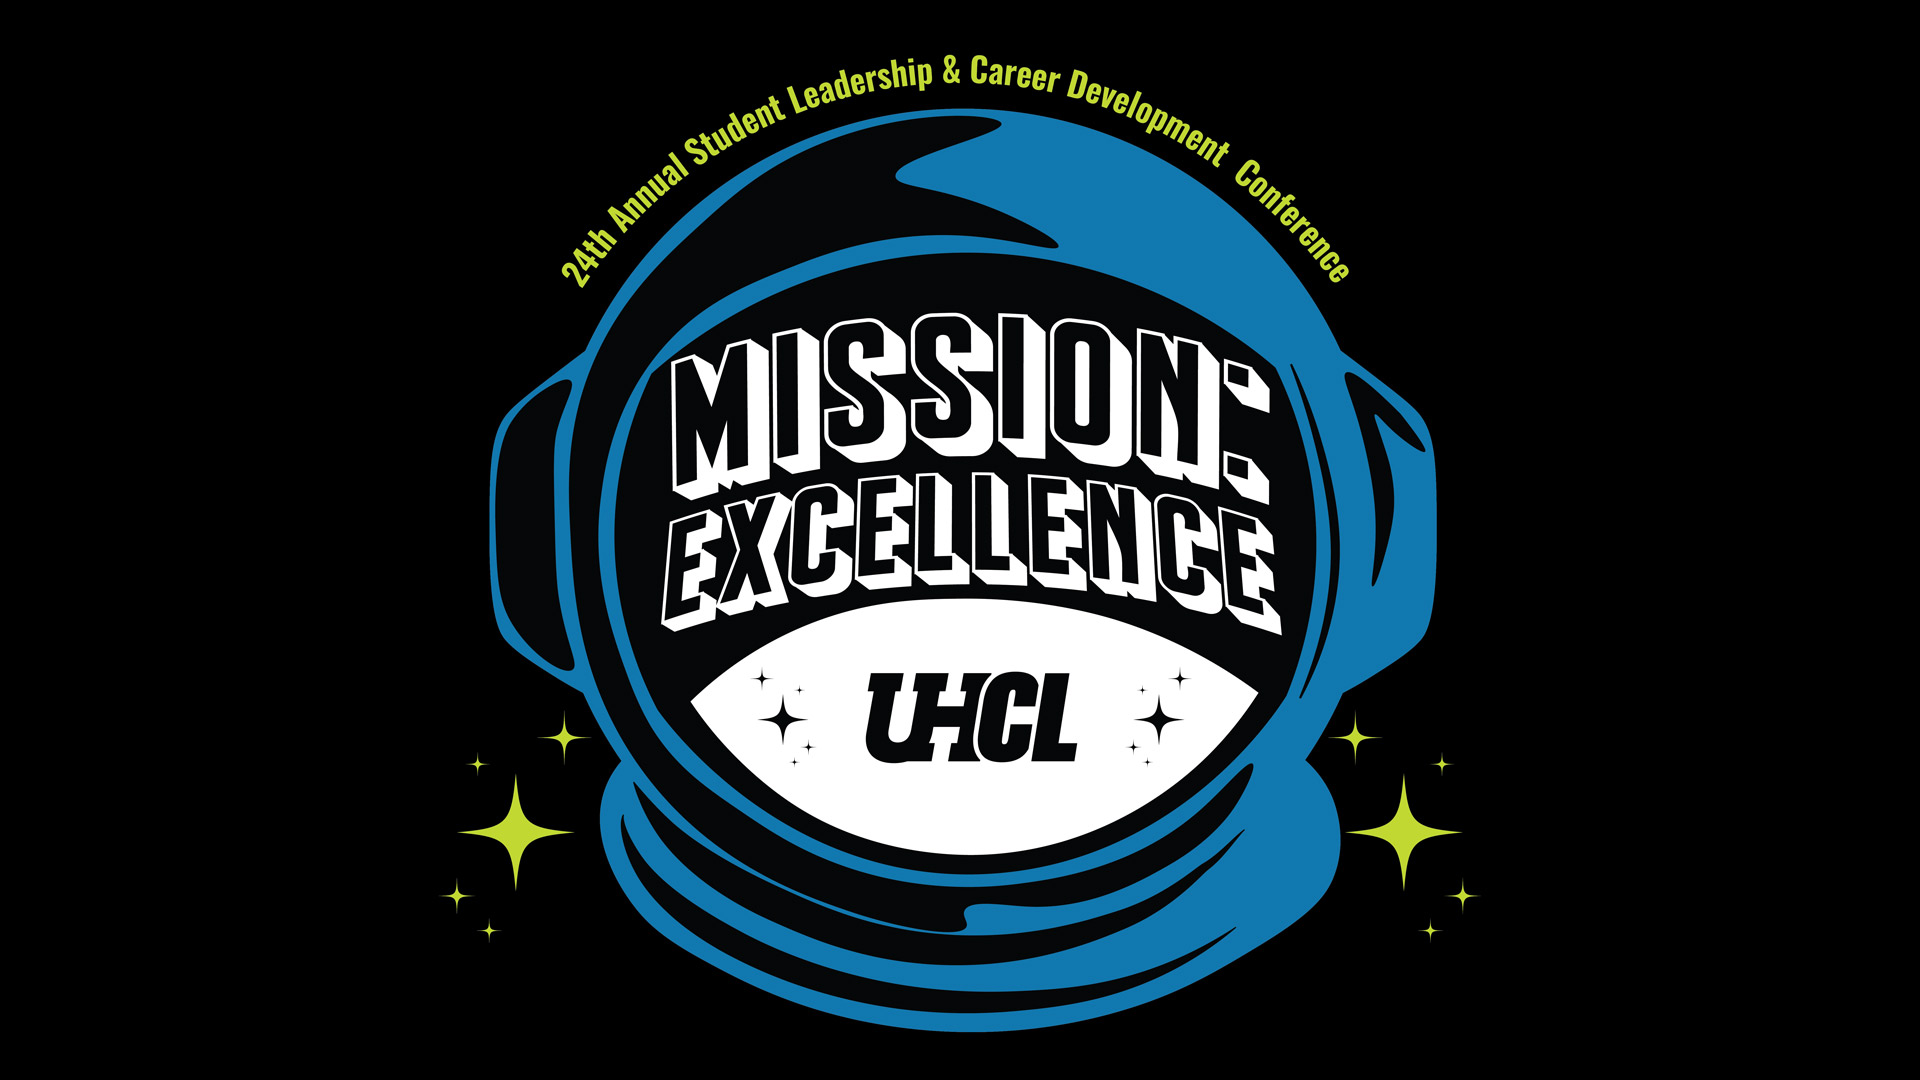 24th Annual Student Leadership and Career Development Conference. Mission: Excellence UHCL